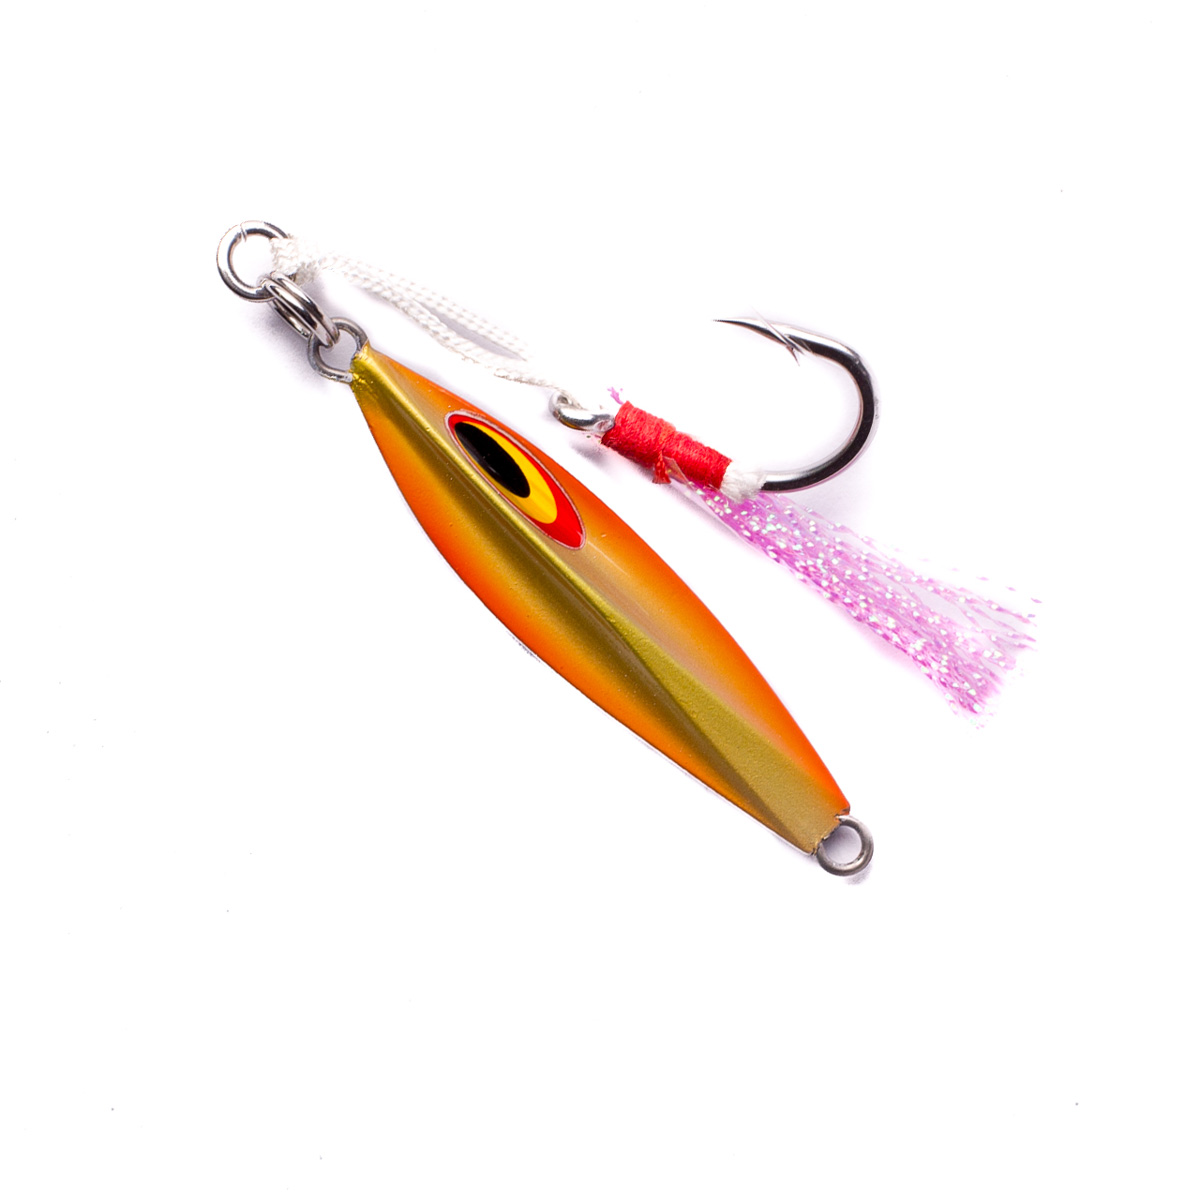 Catch The Enticer Micro Jig - BerleyPro